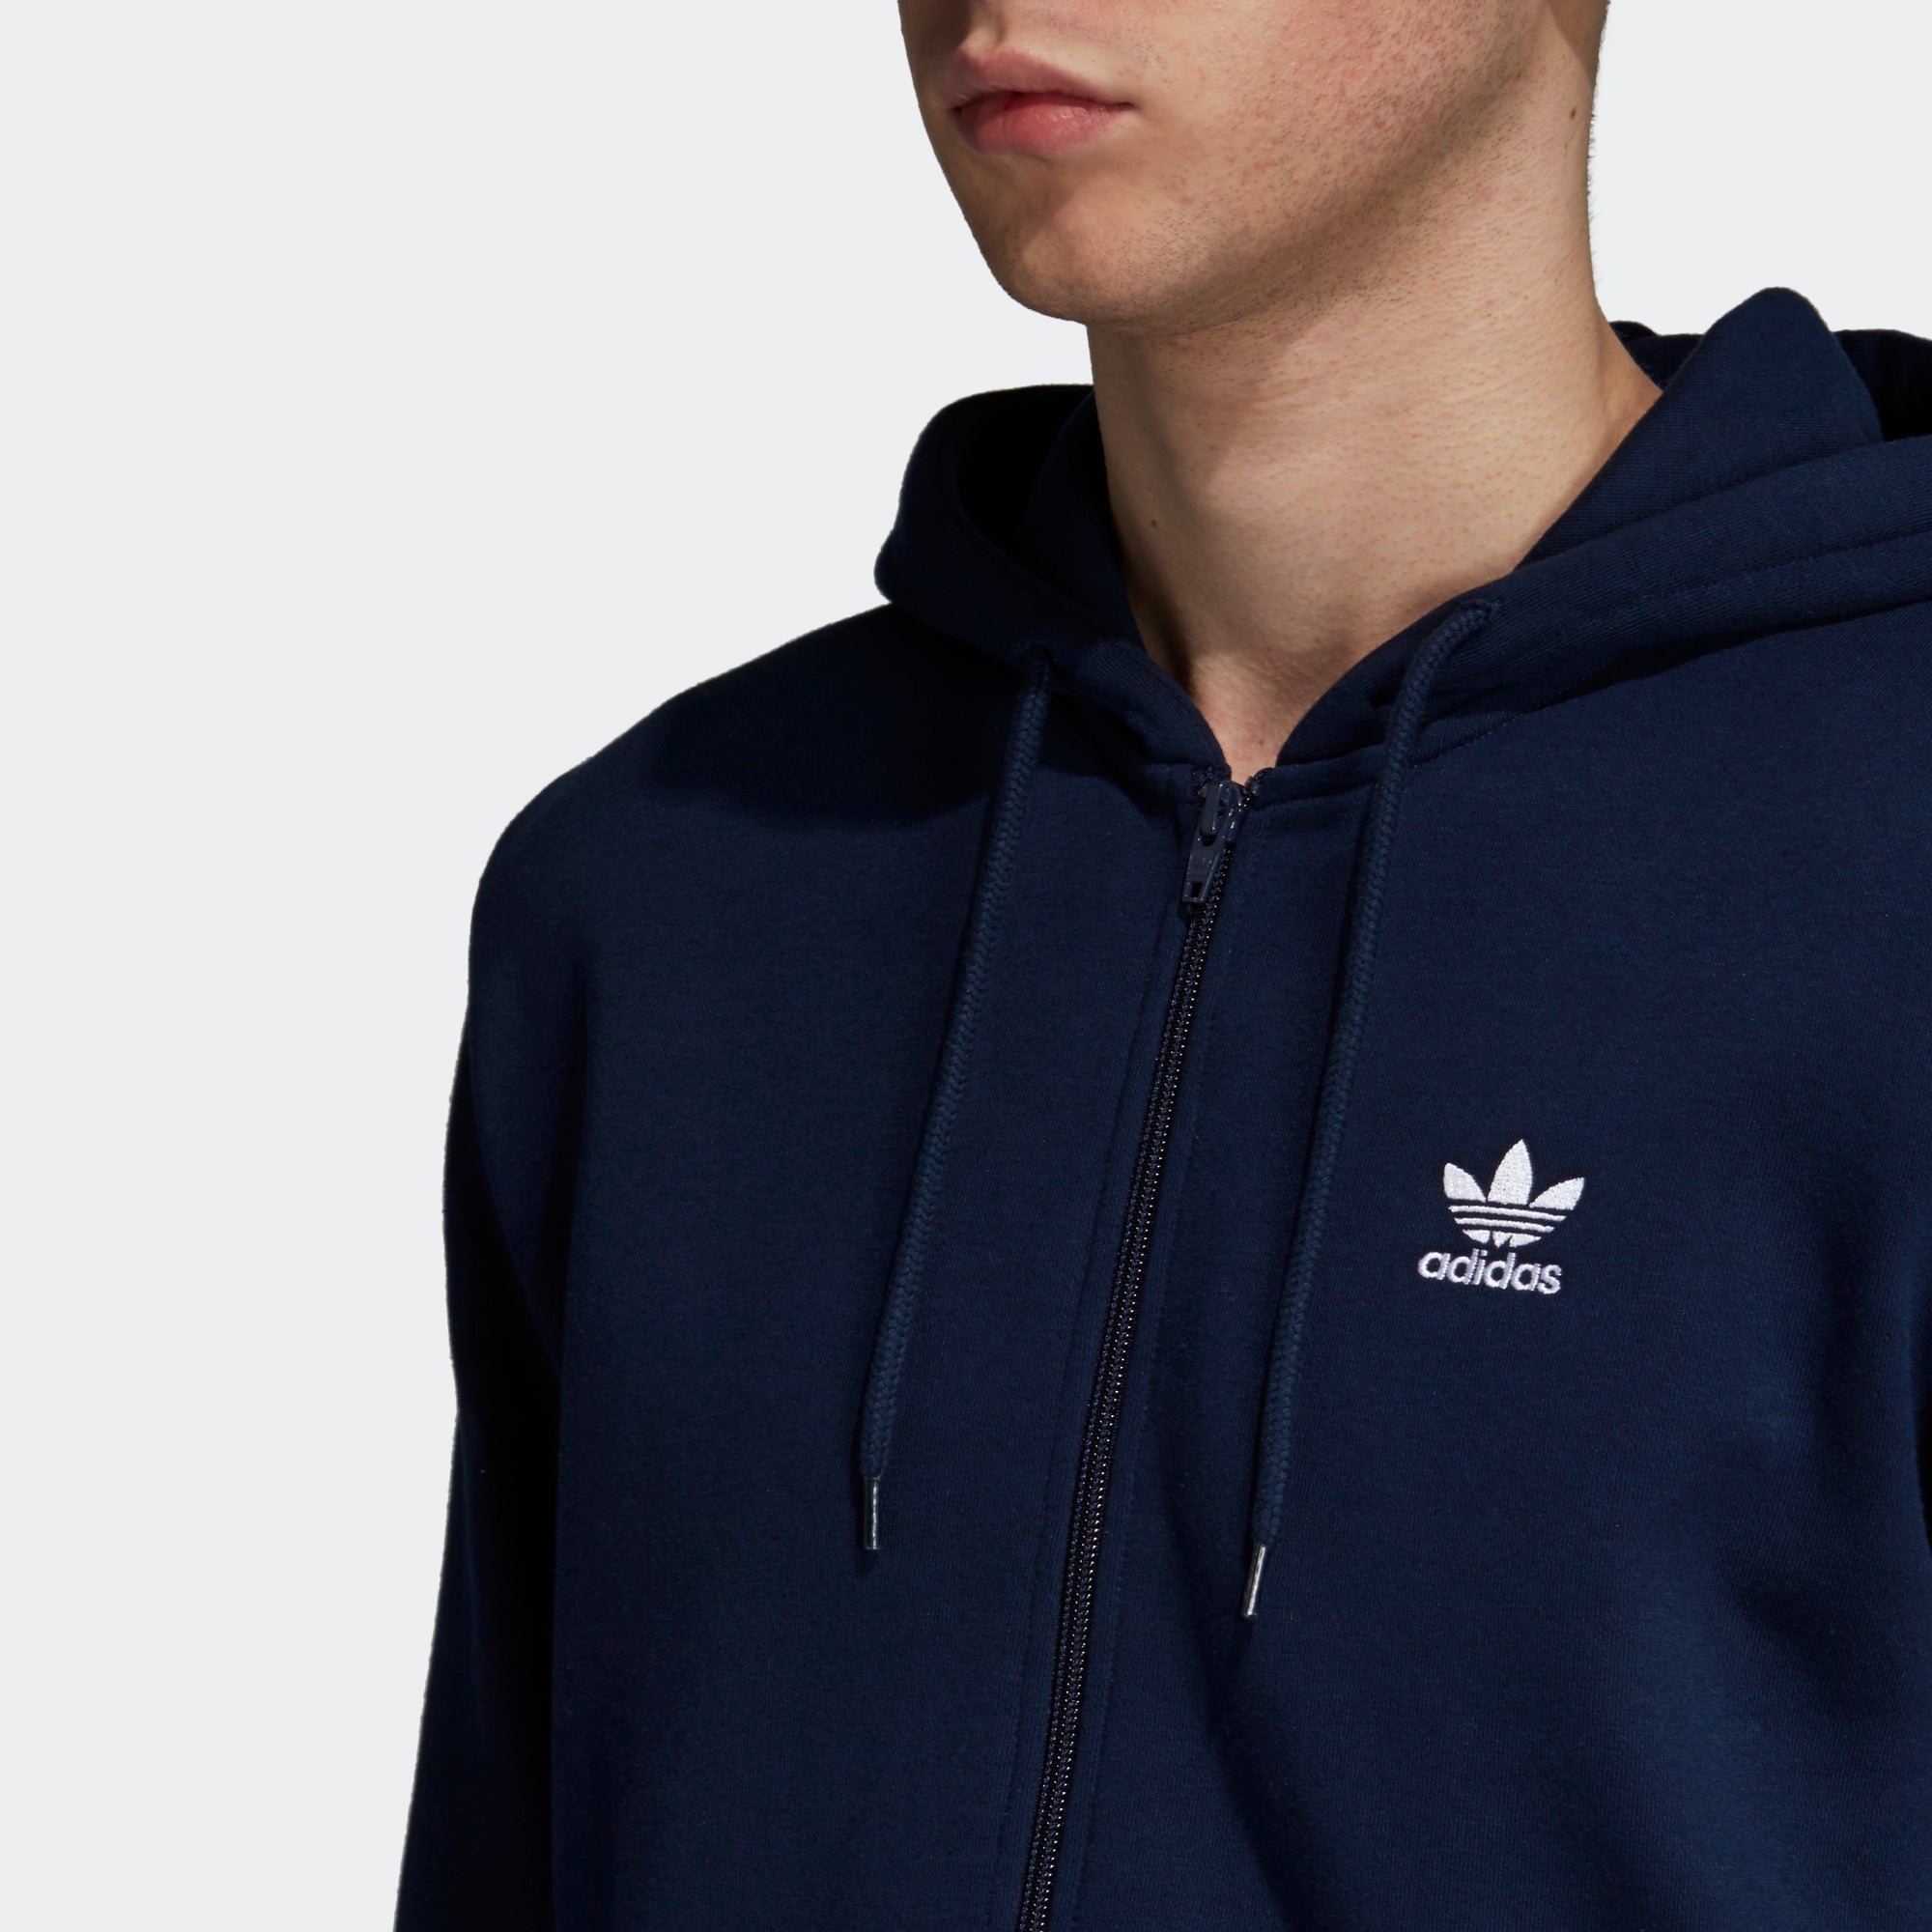 adidas jumpers for men